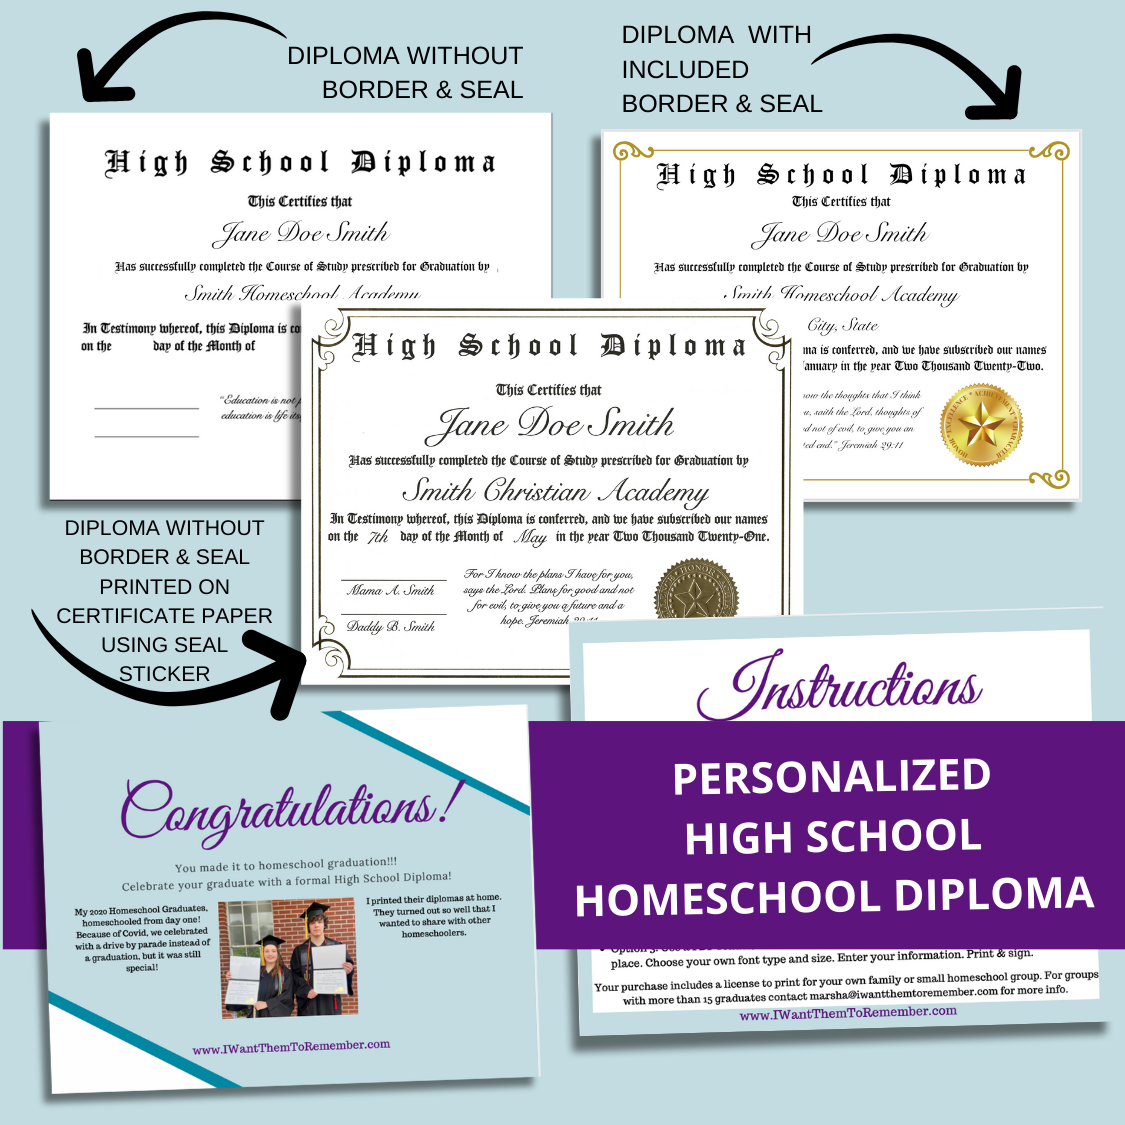 Personalized Printable High School or 8th Grade Homeschool Diploma